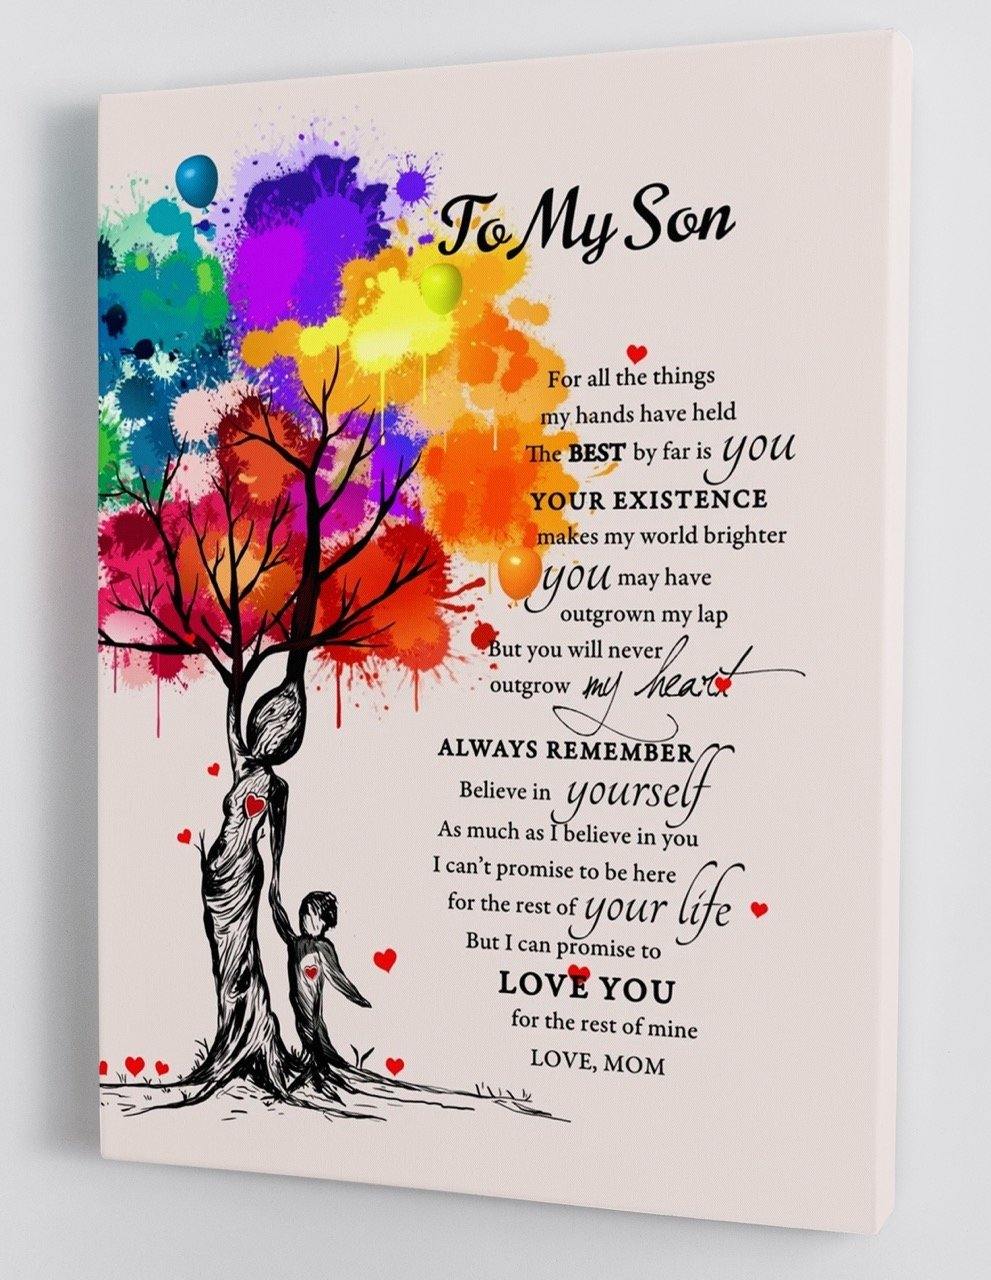 To My Son - From Mom - Framed Canvas Gift MS021 - DivesArt LLC